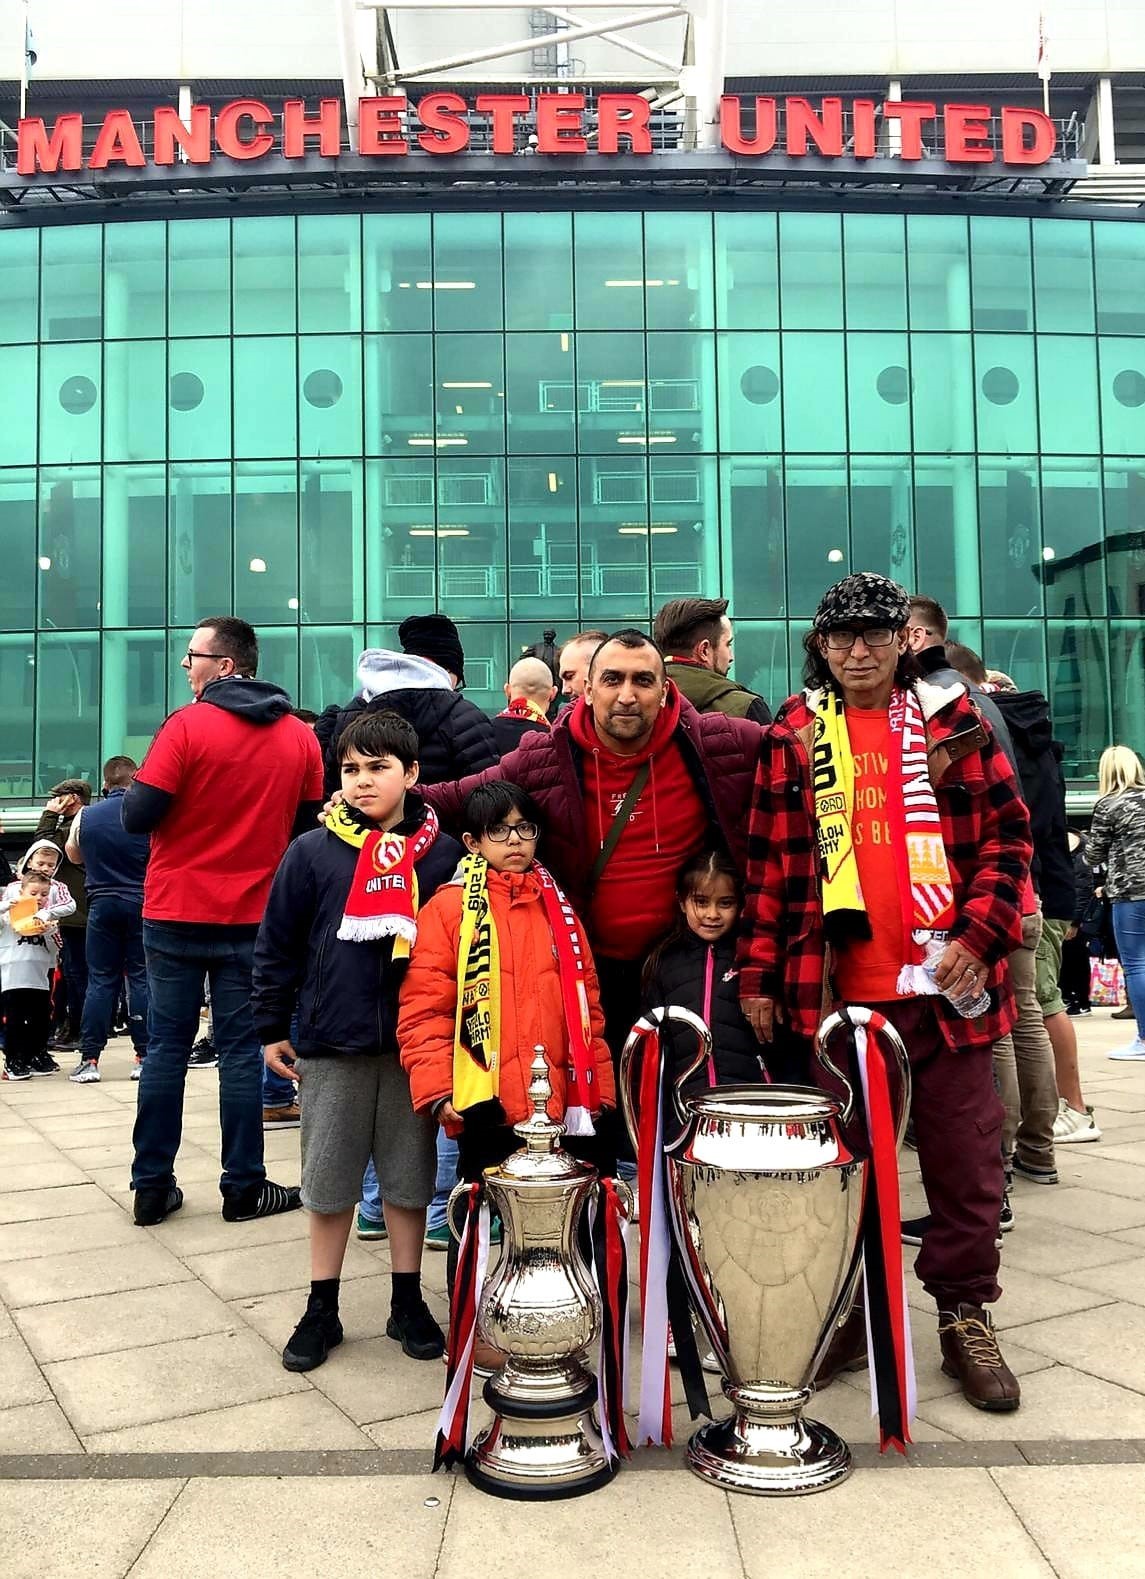 Mohammed Akhtar pictured with members of his family outside Manchester Uniteds ground